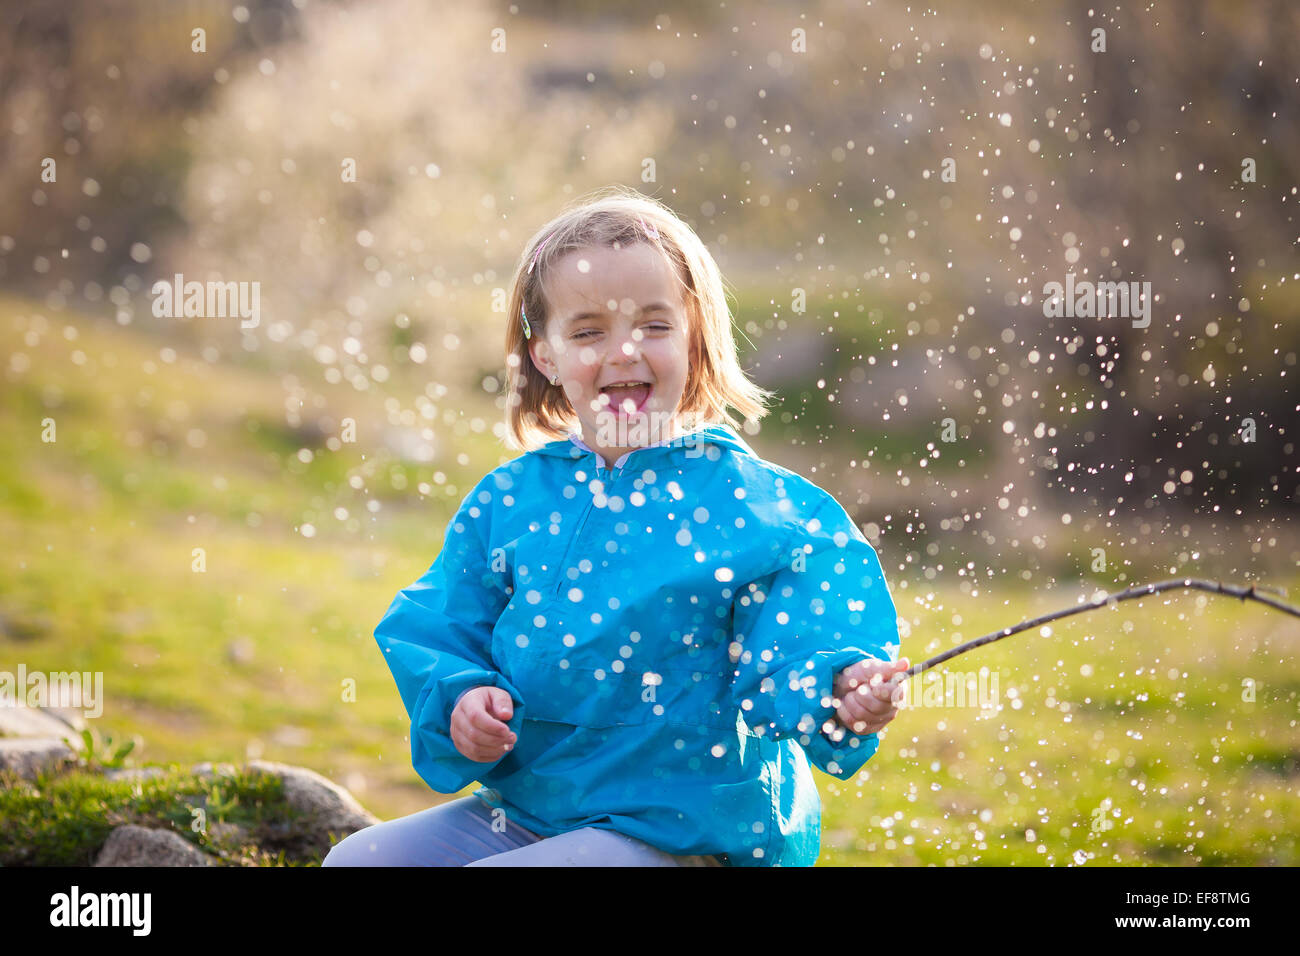 Girl (4-5) playing outdoors Stock Photo